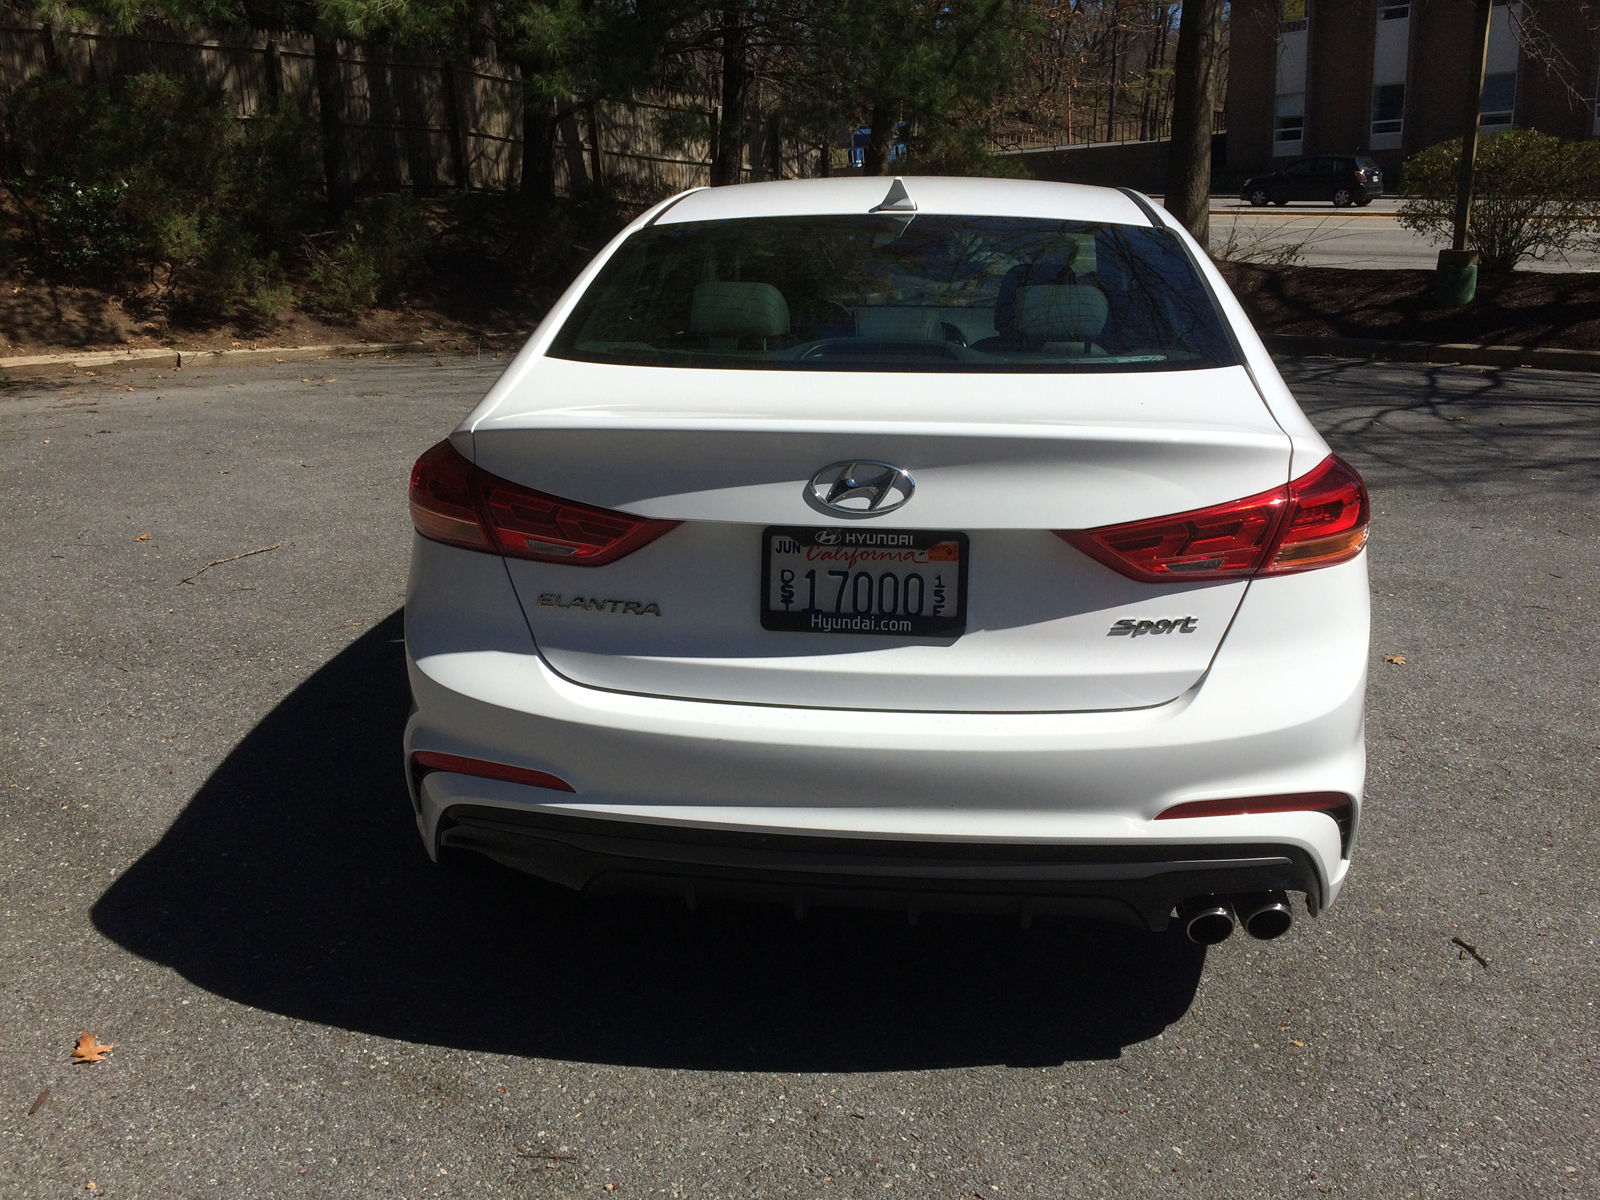 The normal Elantra is a solid compact but not very quick or sporty to drive so the Hyundai Elantra Sport steps in to add some spice to the small sedan. (WTOP/Mike Parris)